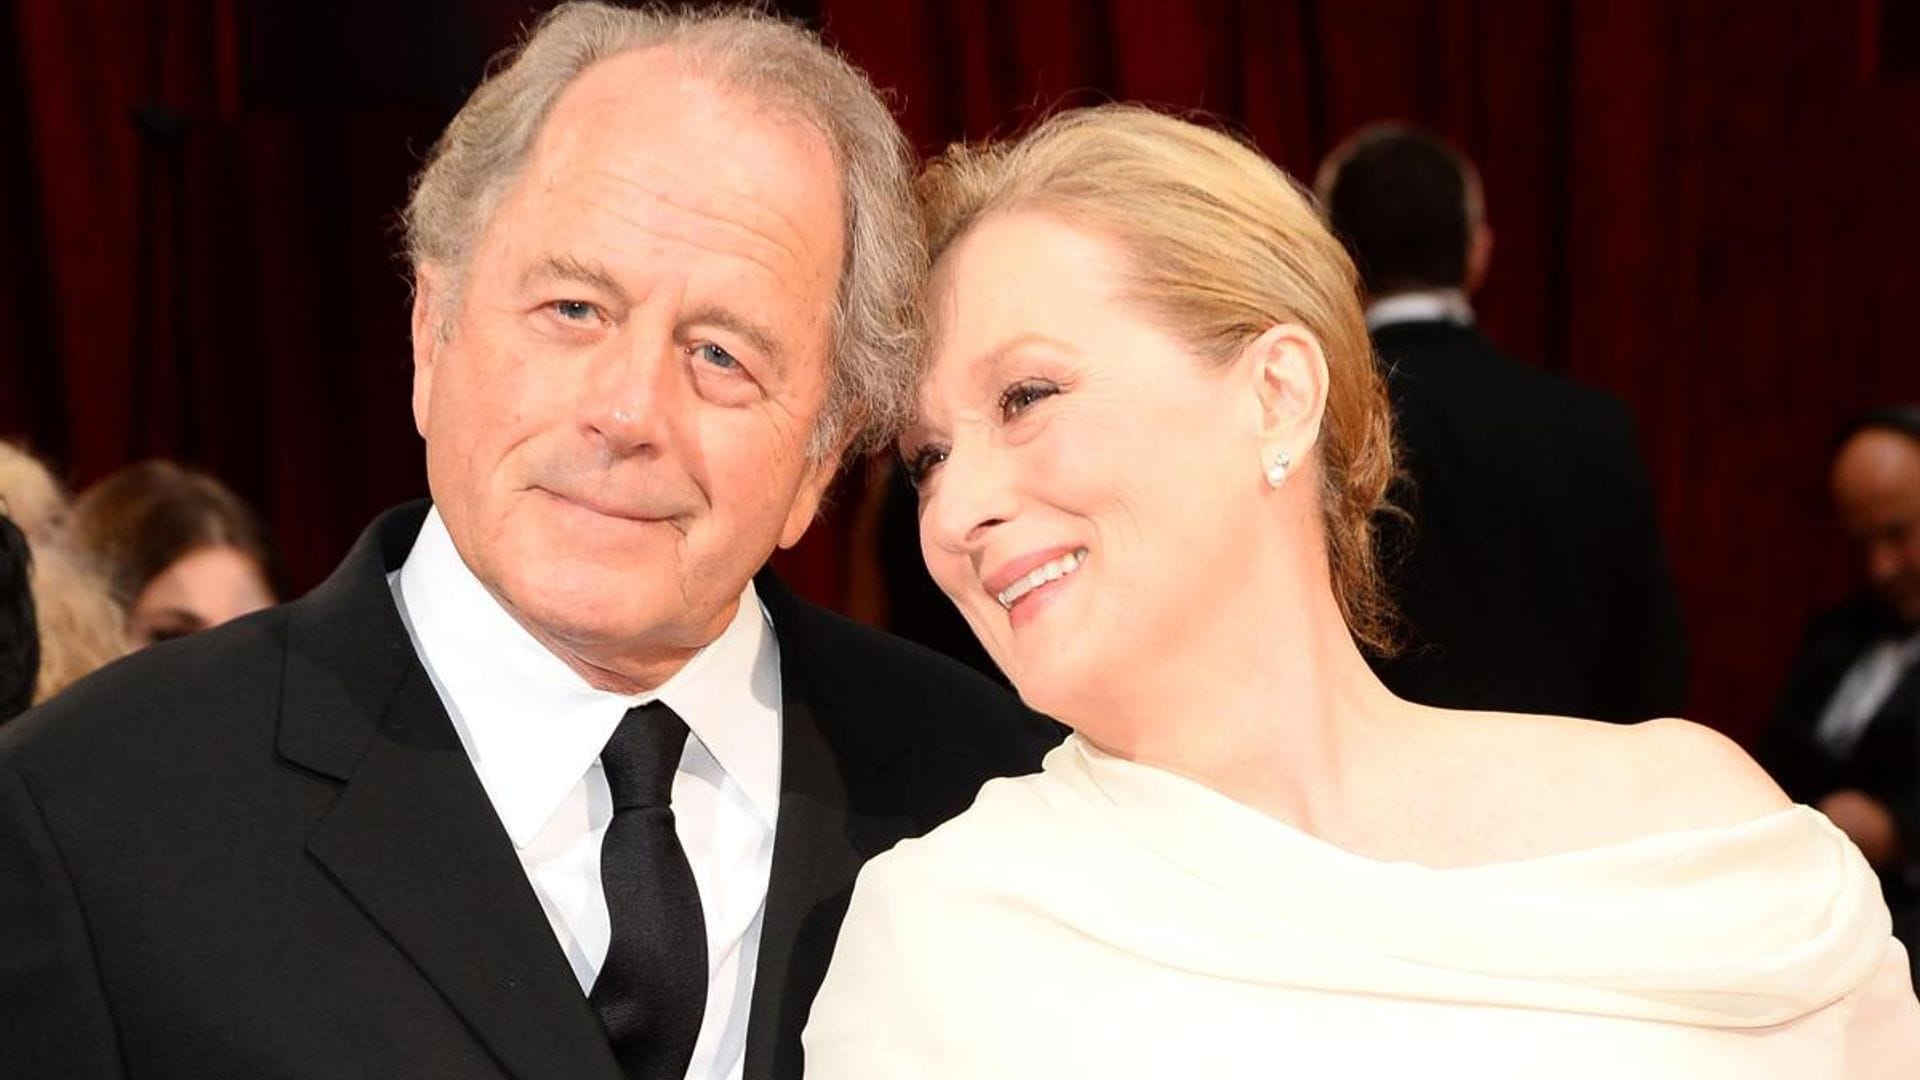 Why Meryl Streep and Don Gummer decided to separate after 45 years of marriage